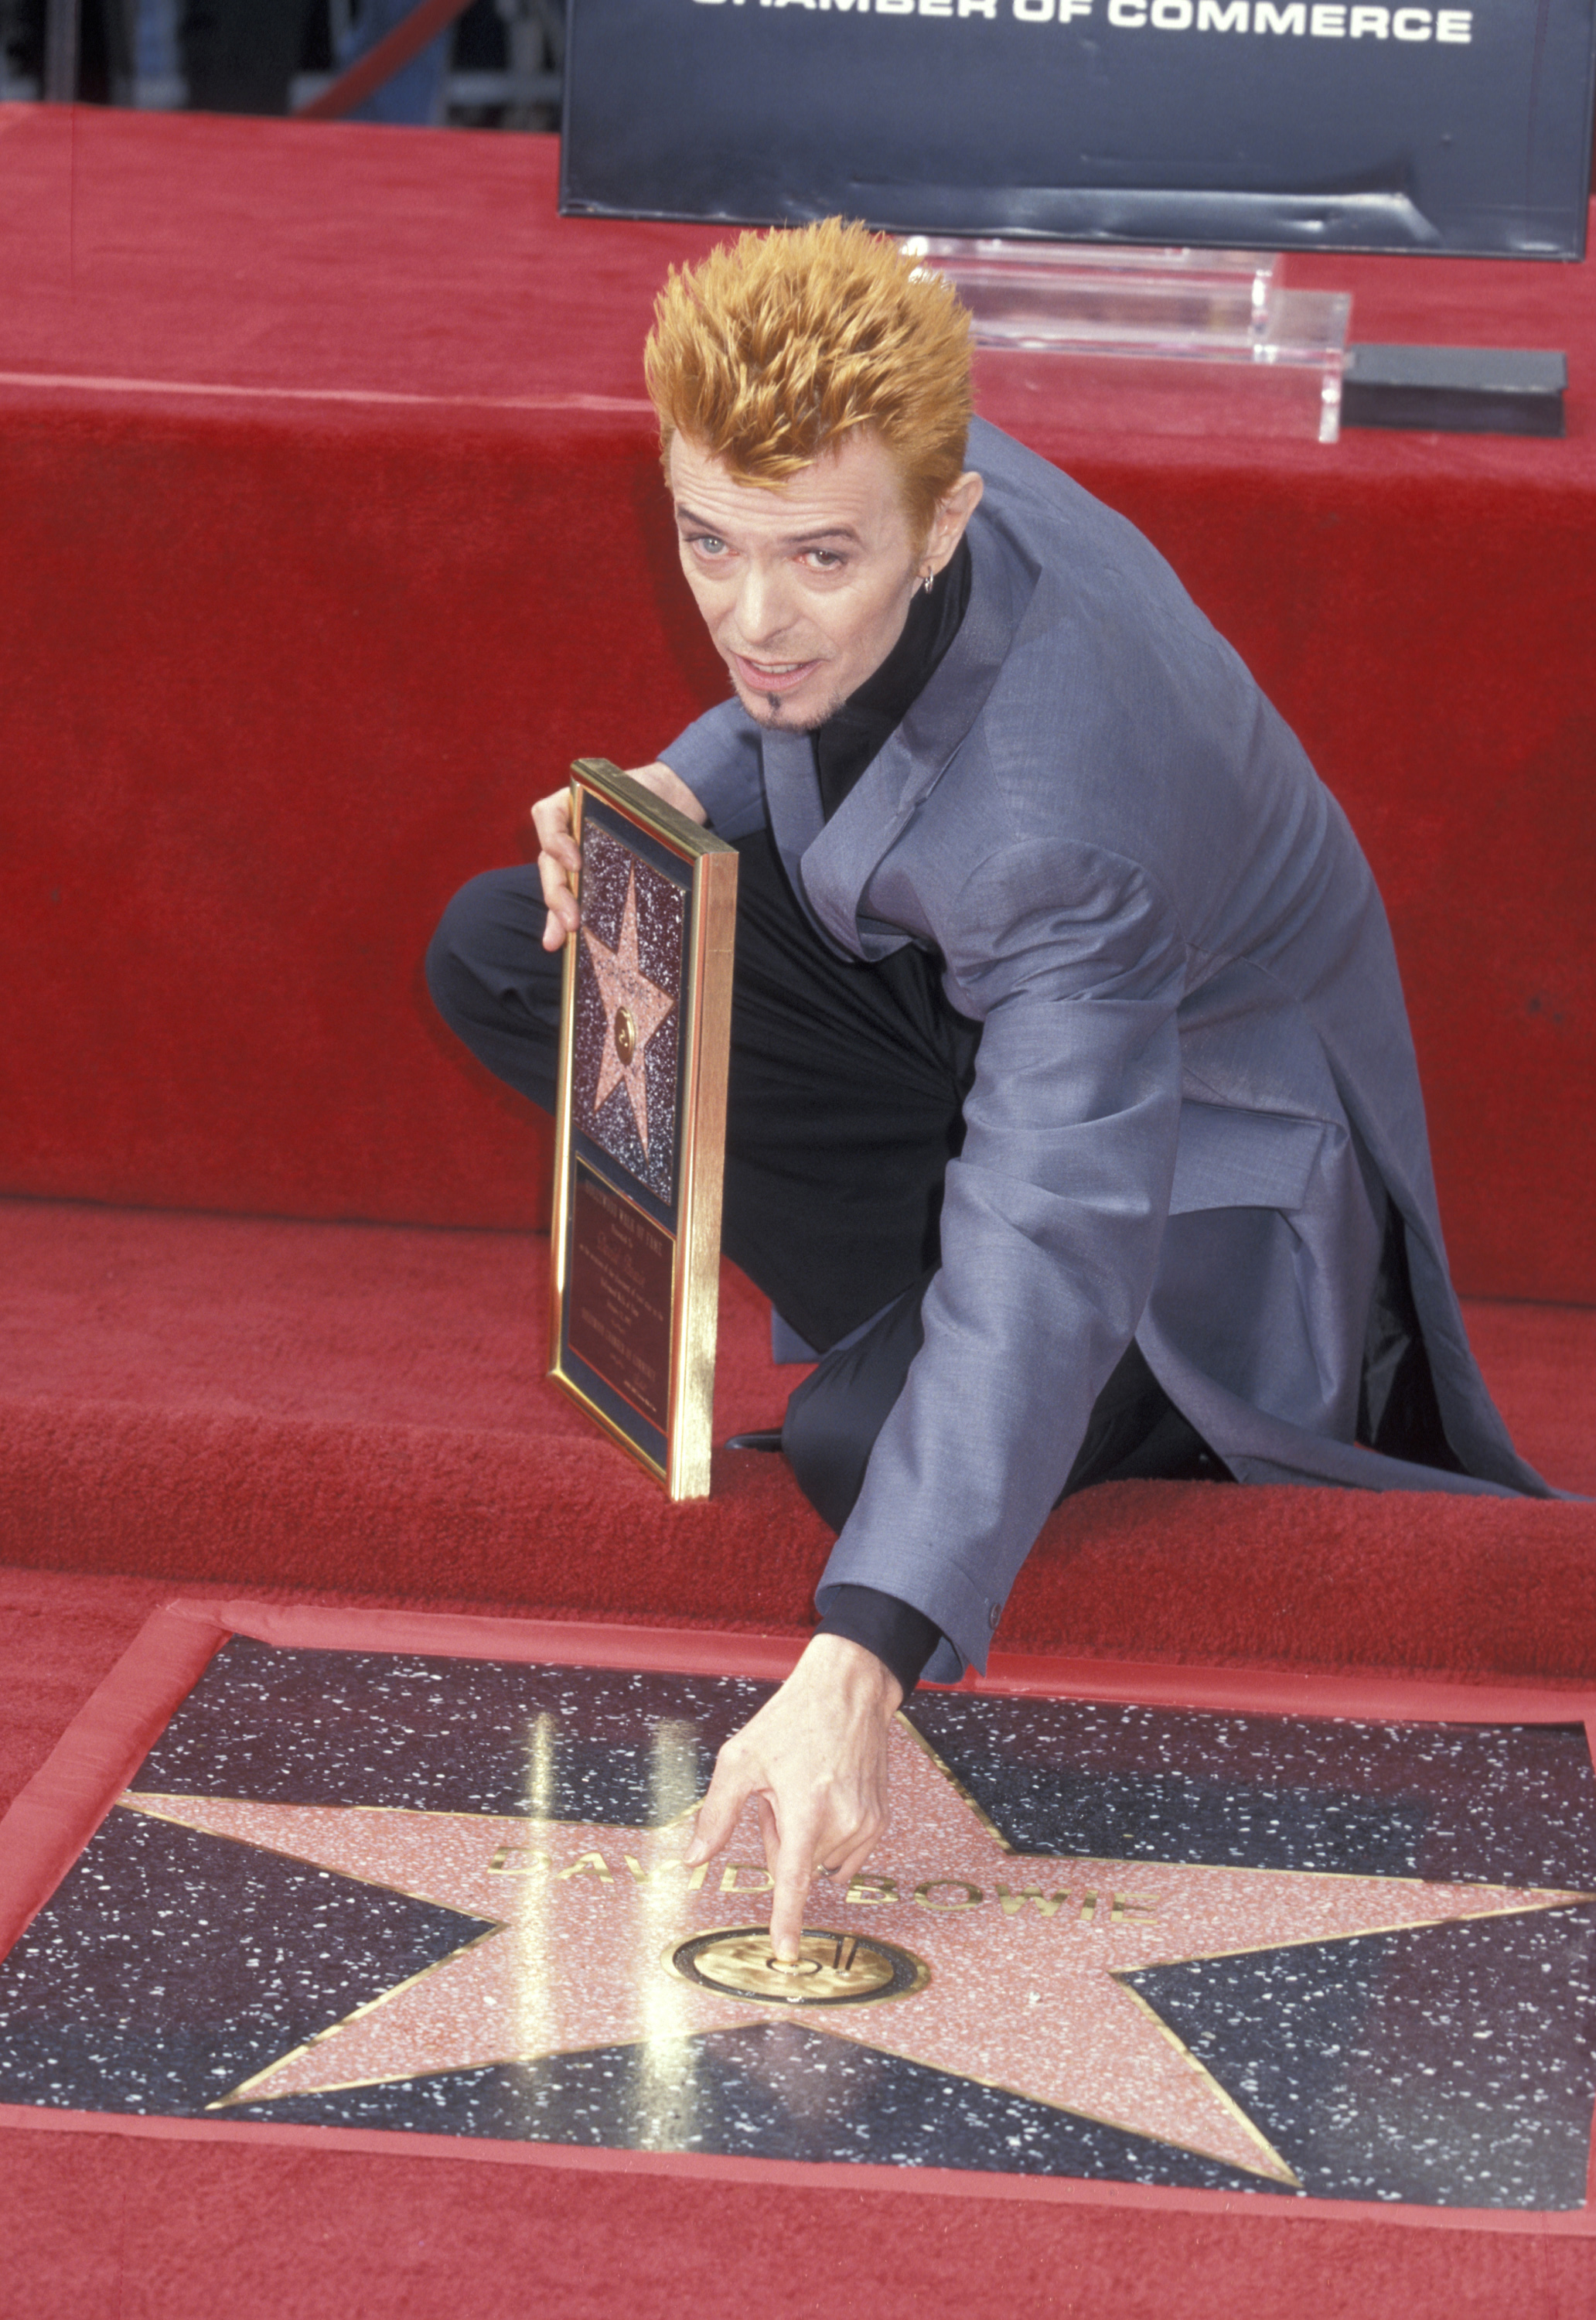 David Bowie is seen while being honored with a star on the Hollywood Walk of Fame in Hollywood, Calif. on Feb. 12, 1997.